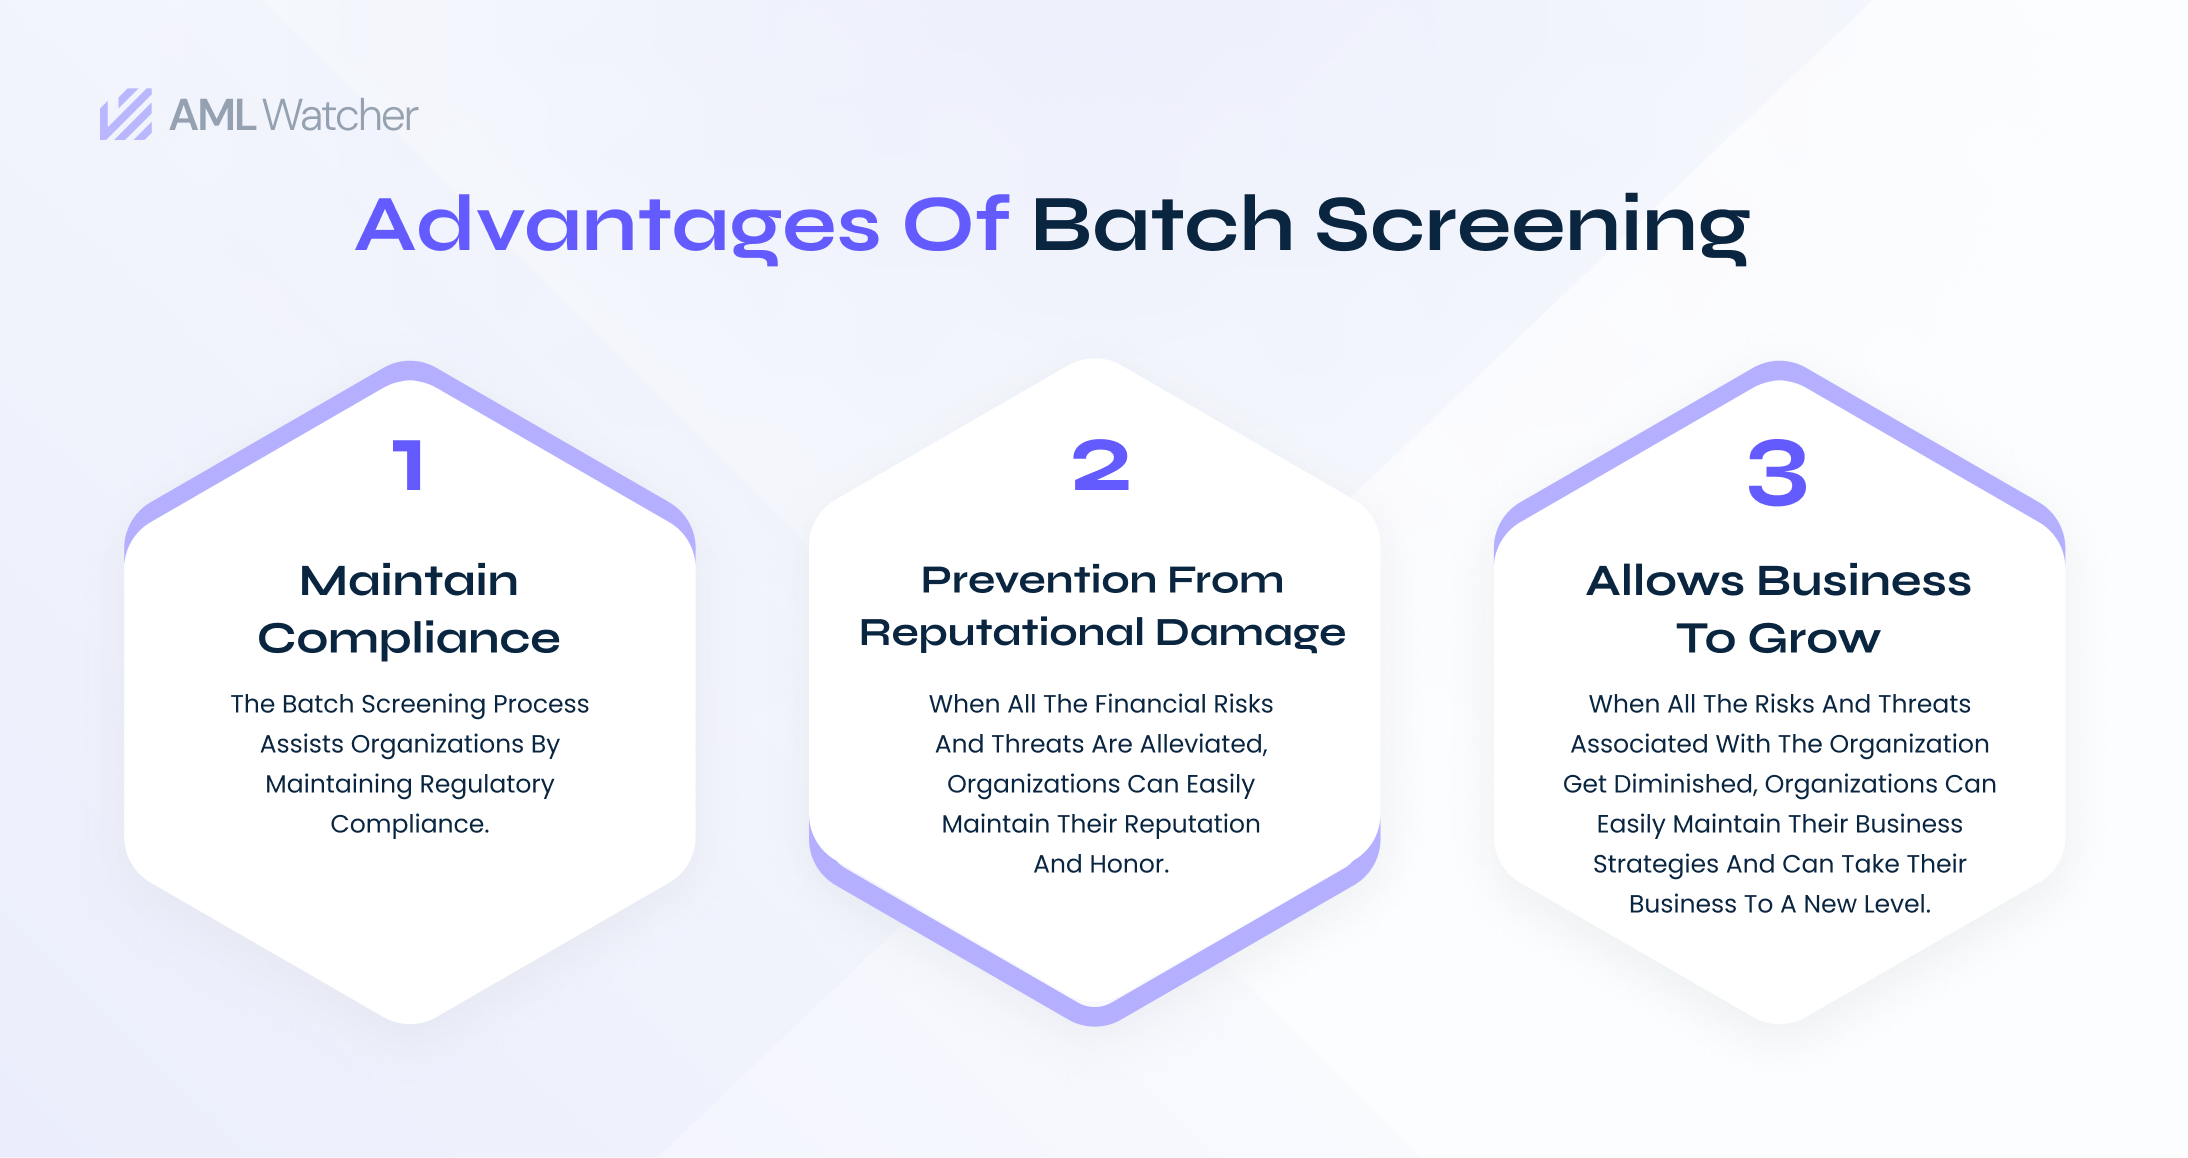 Batch screening services provide the organizations with numerous advantages.